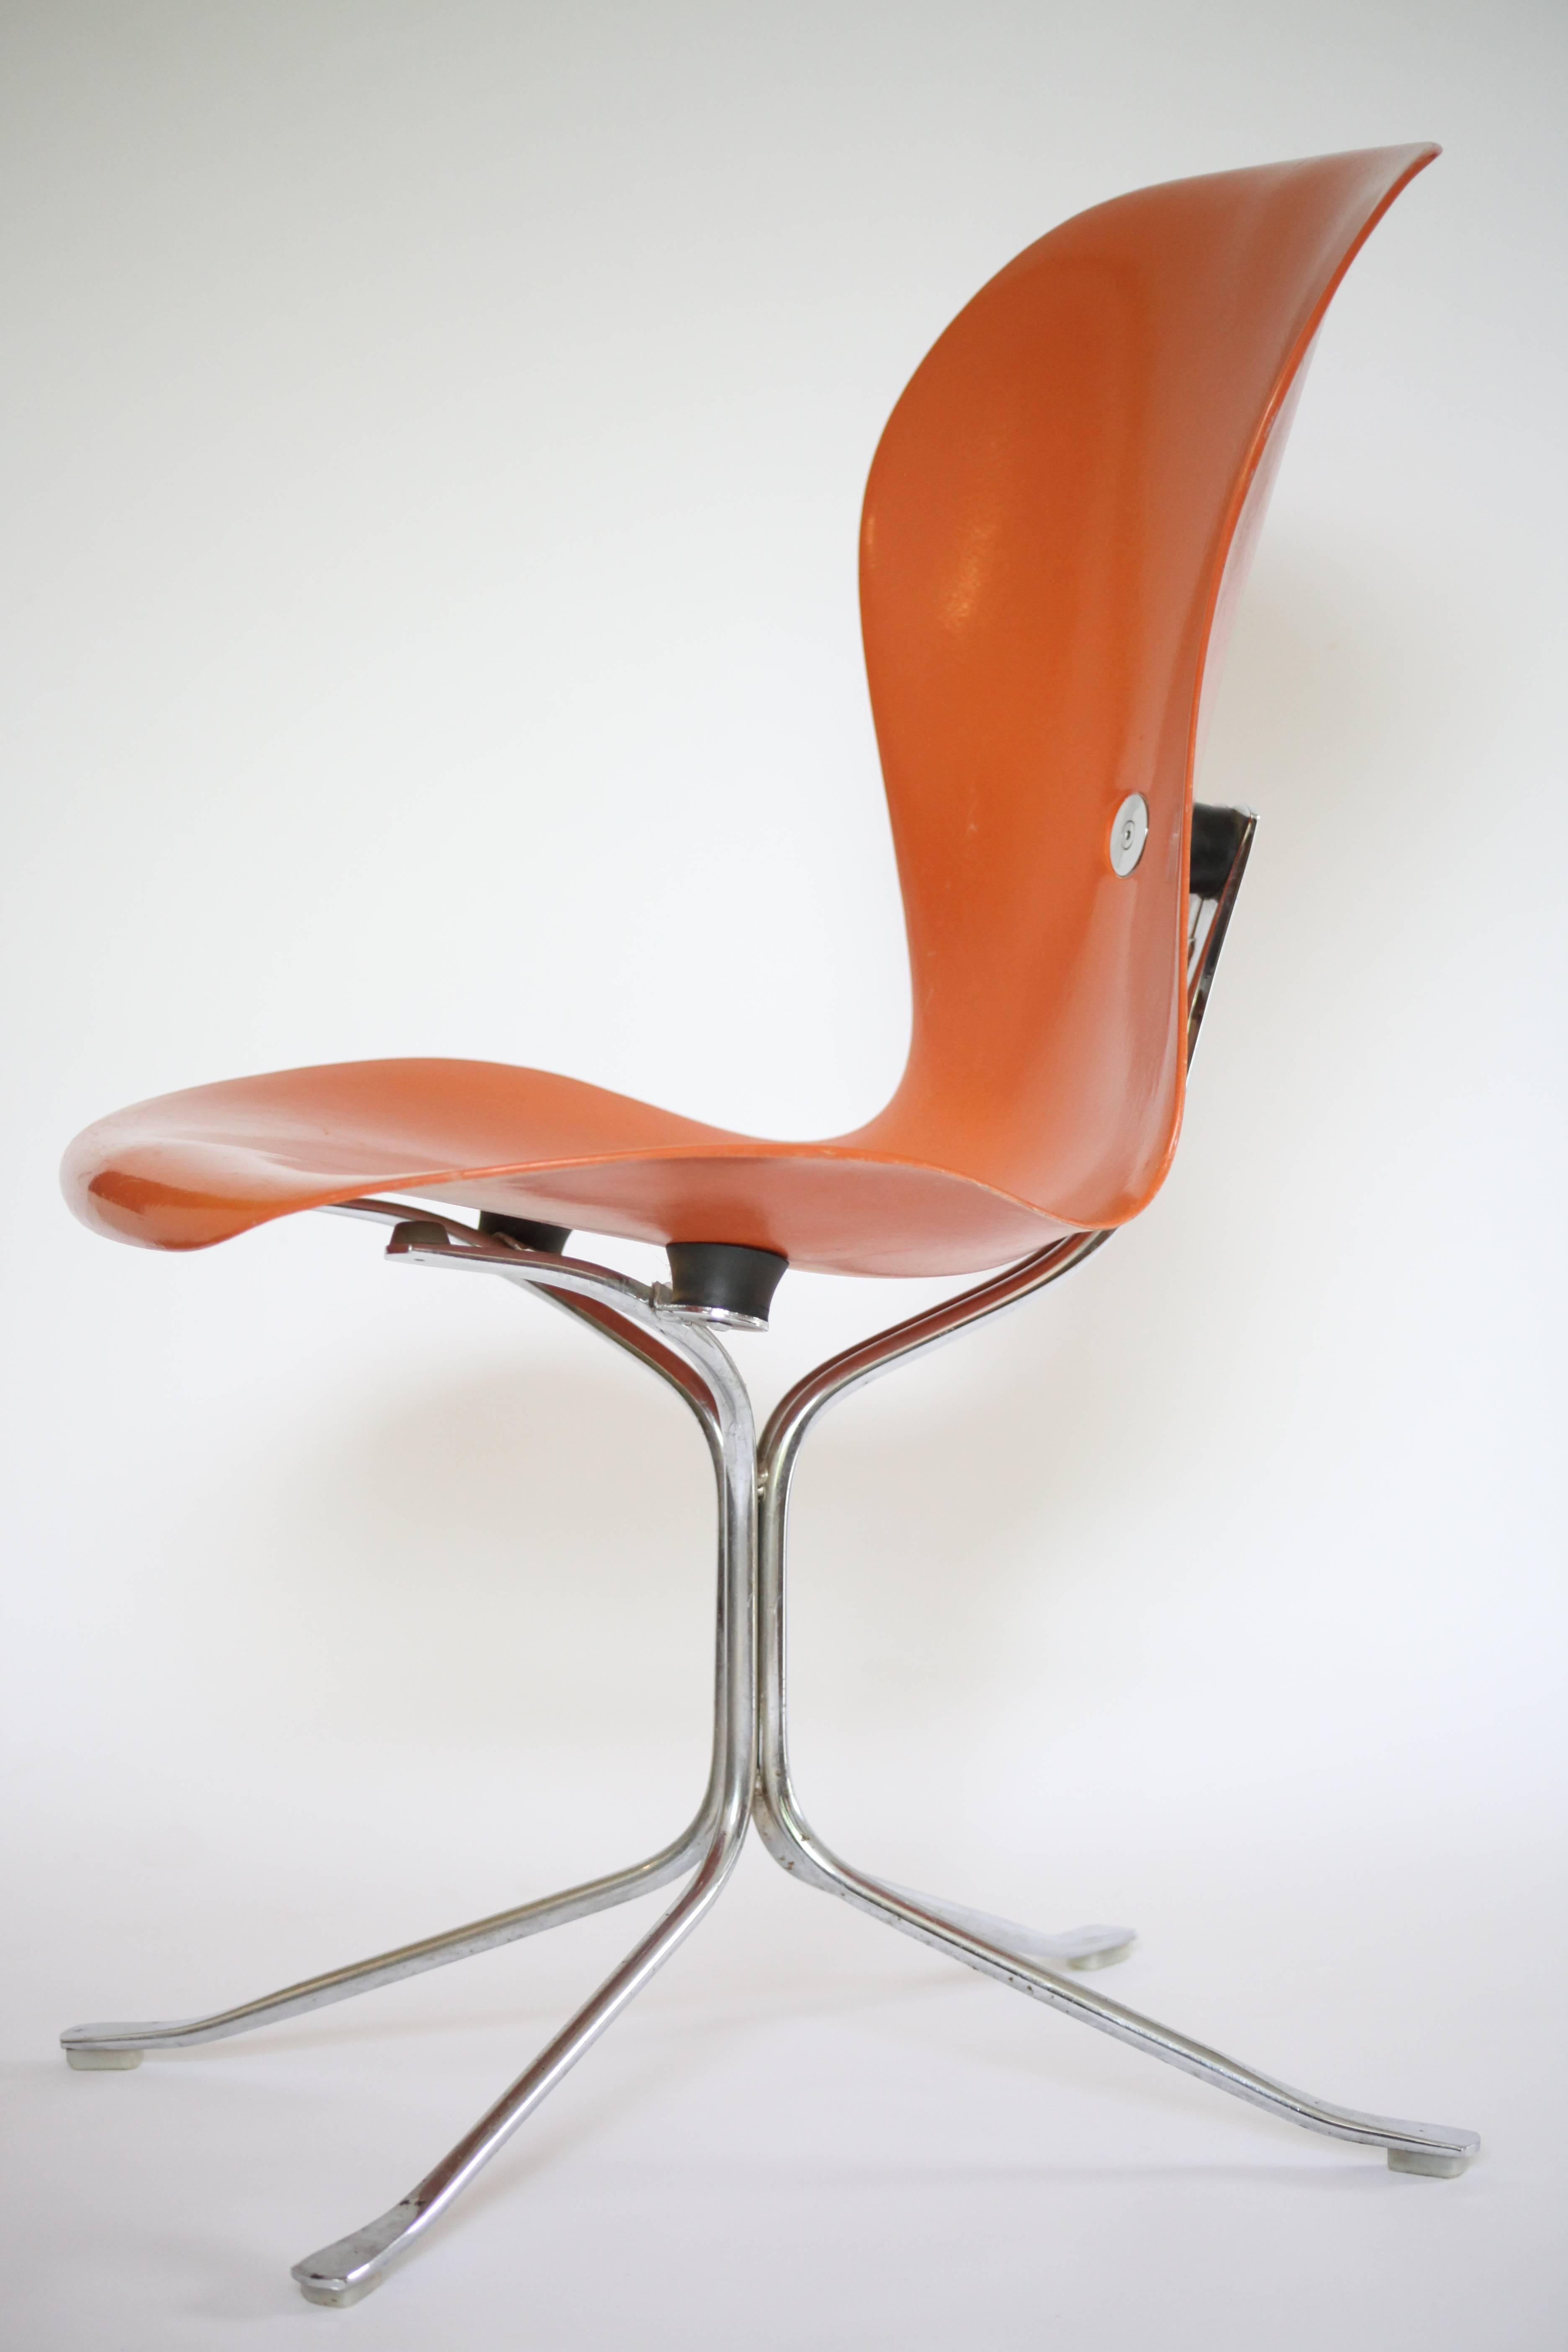 Gideon Kramer Ion Fiberglass Chairs In Good Condition For Sale In Pittsburgh, PA